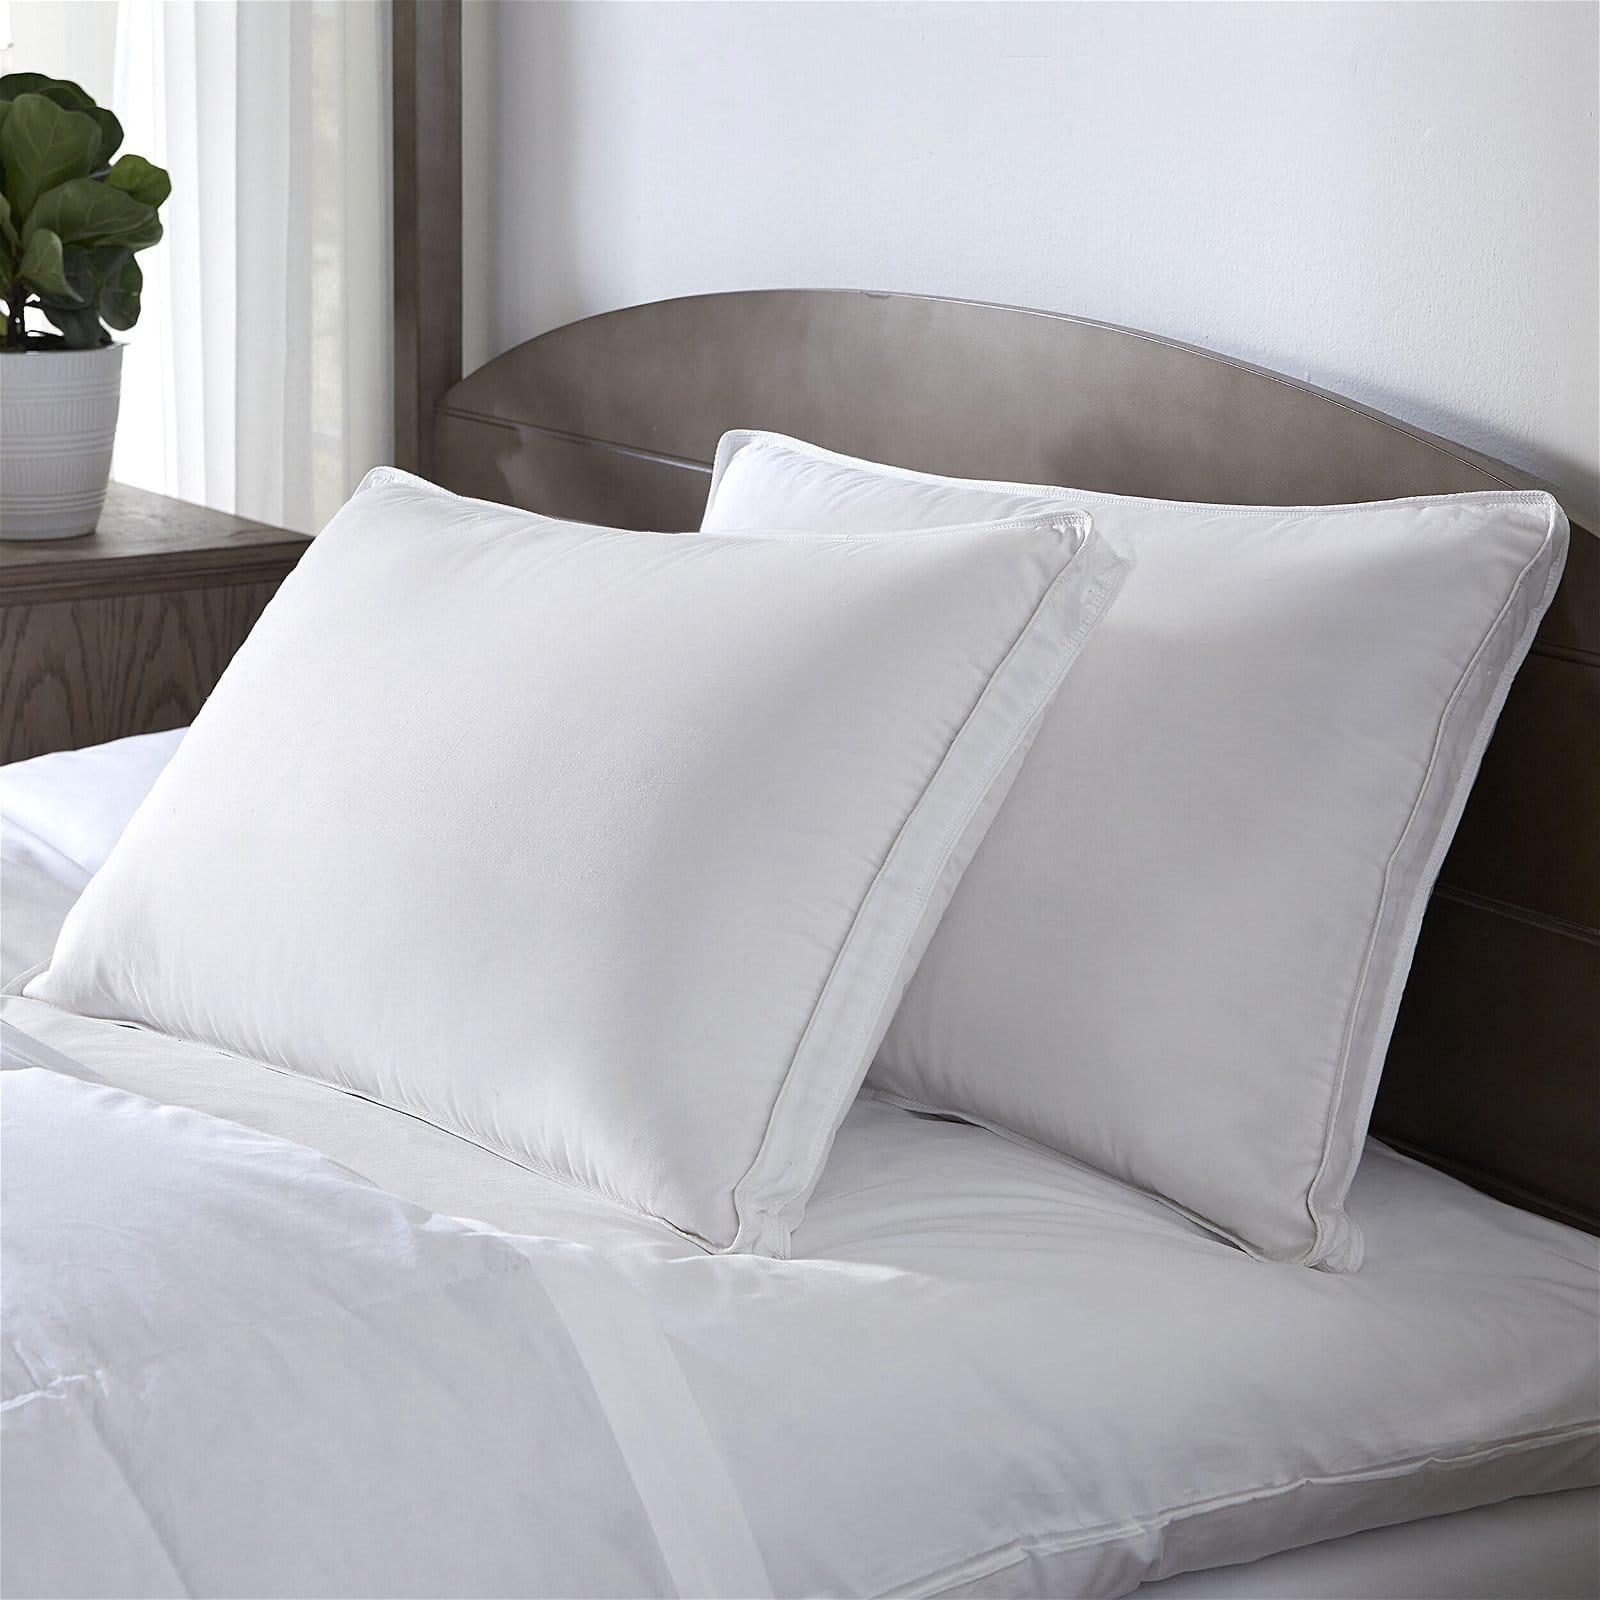 Heritage Double DownAround® Organic Cotton Cover Pillow